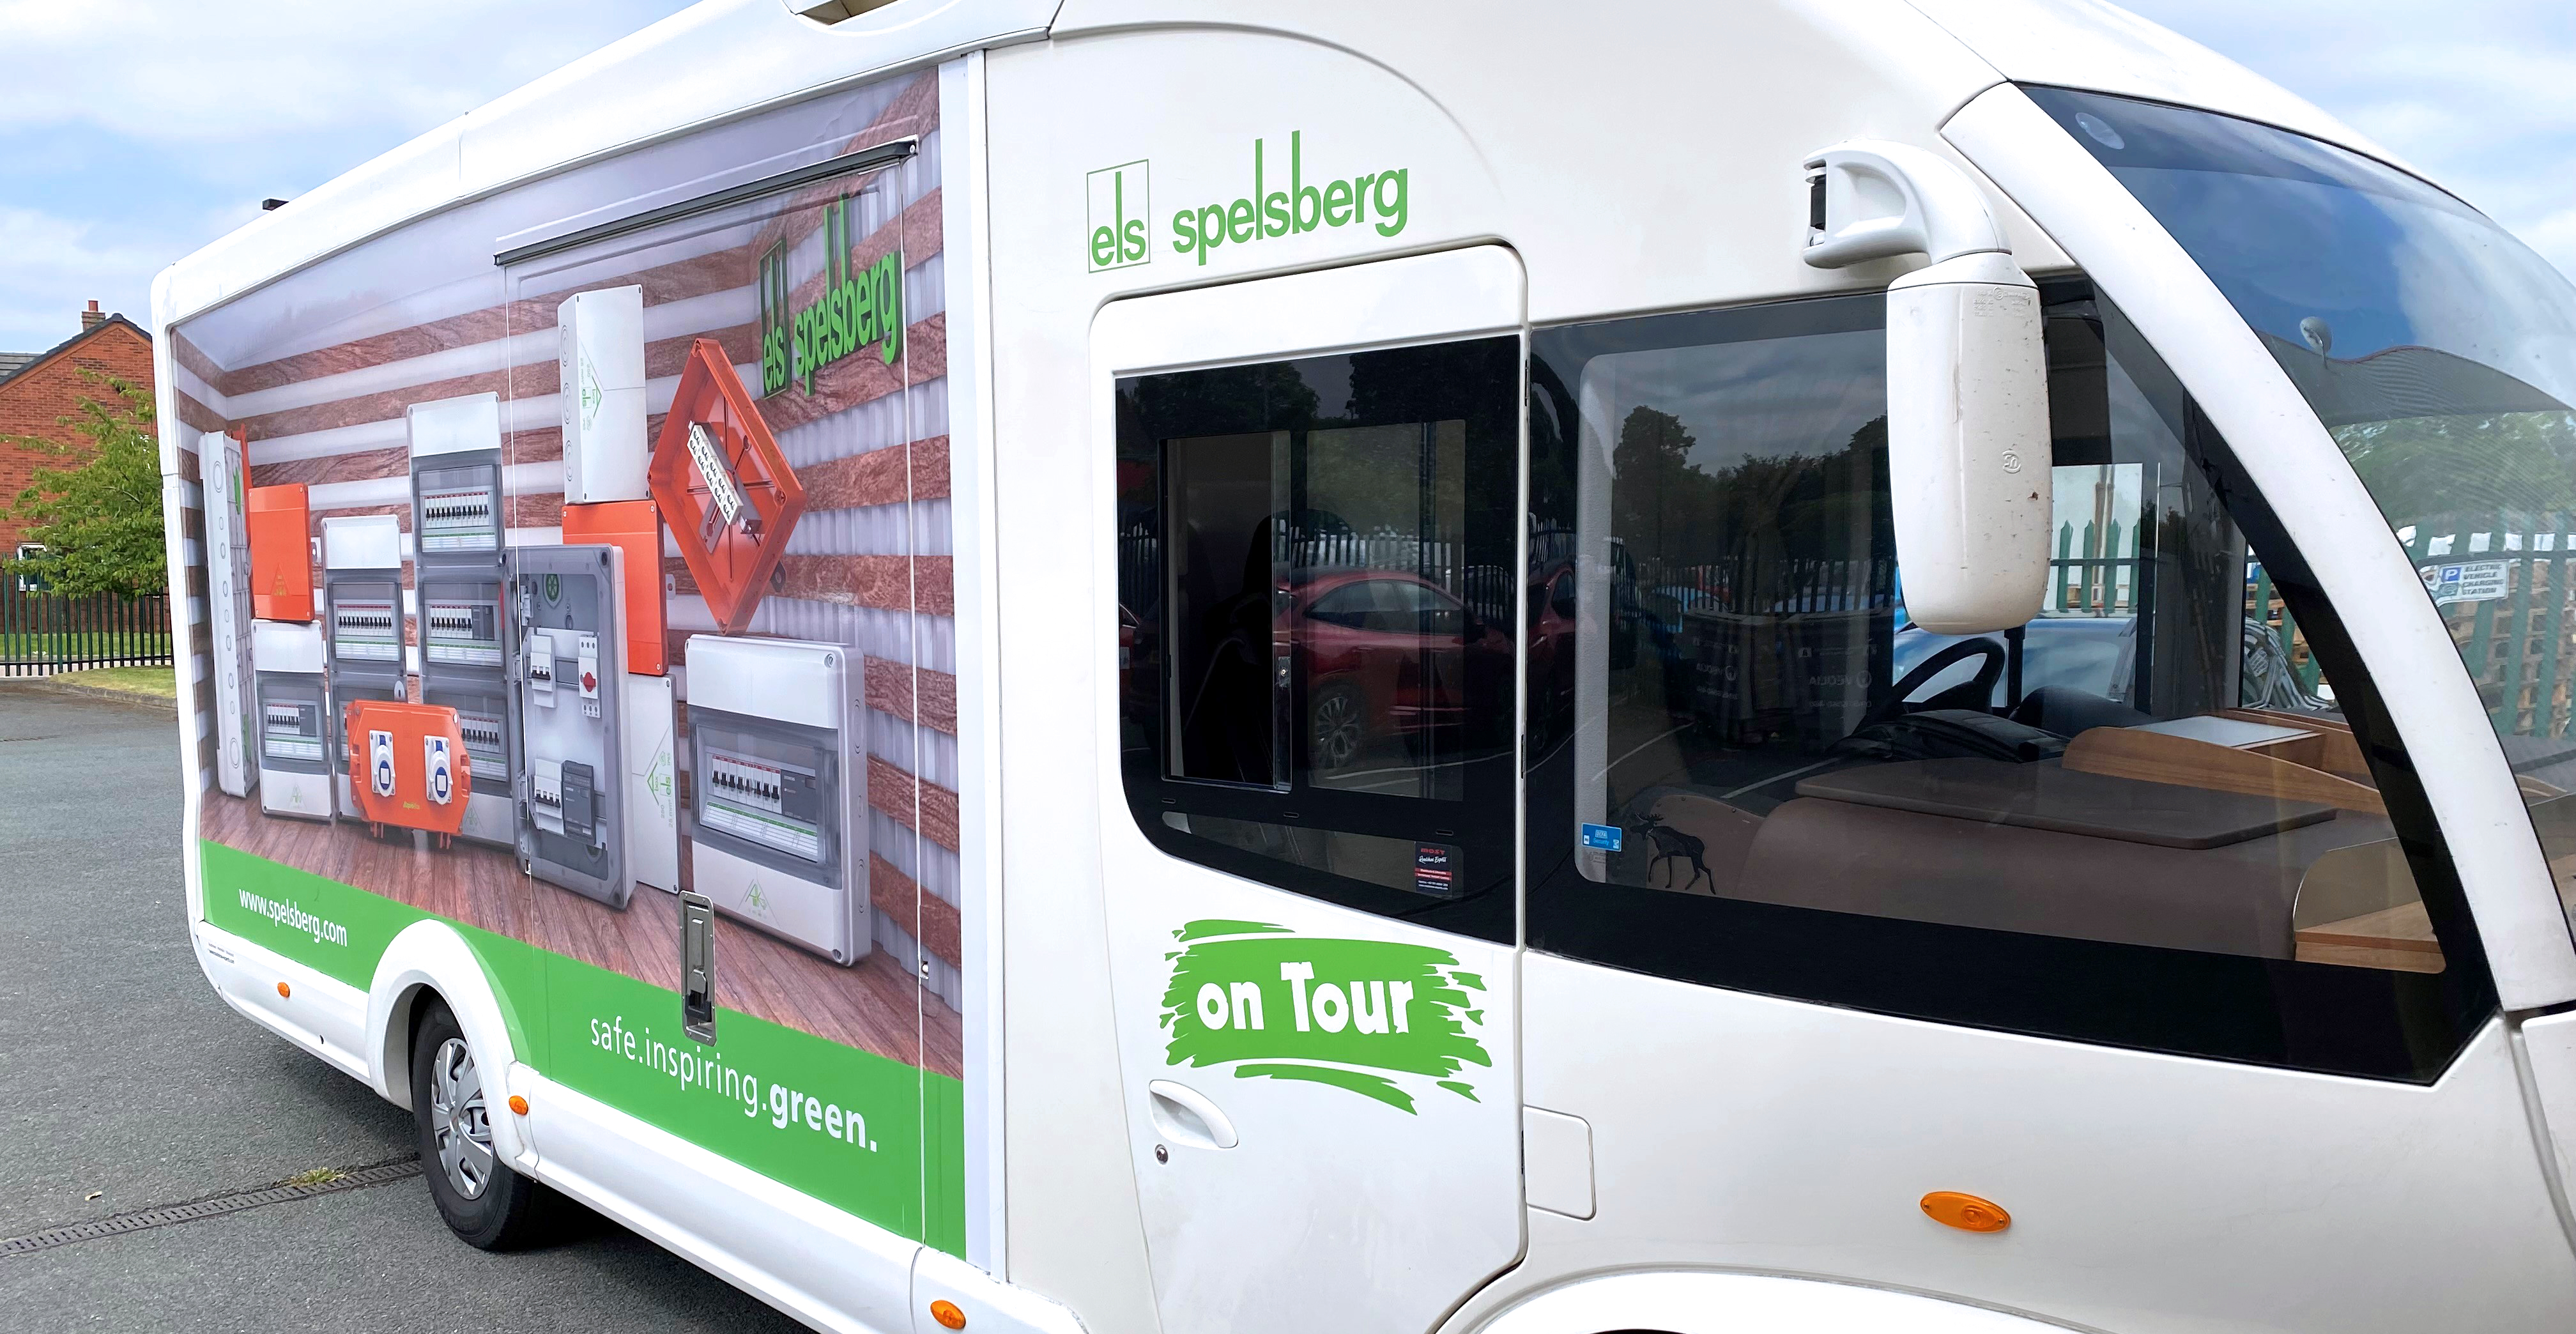 A state-of-the-art Spelsberg tour bus, equipped with a working showroom, will visit numerous locations across the country beginning late May.